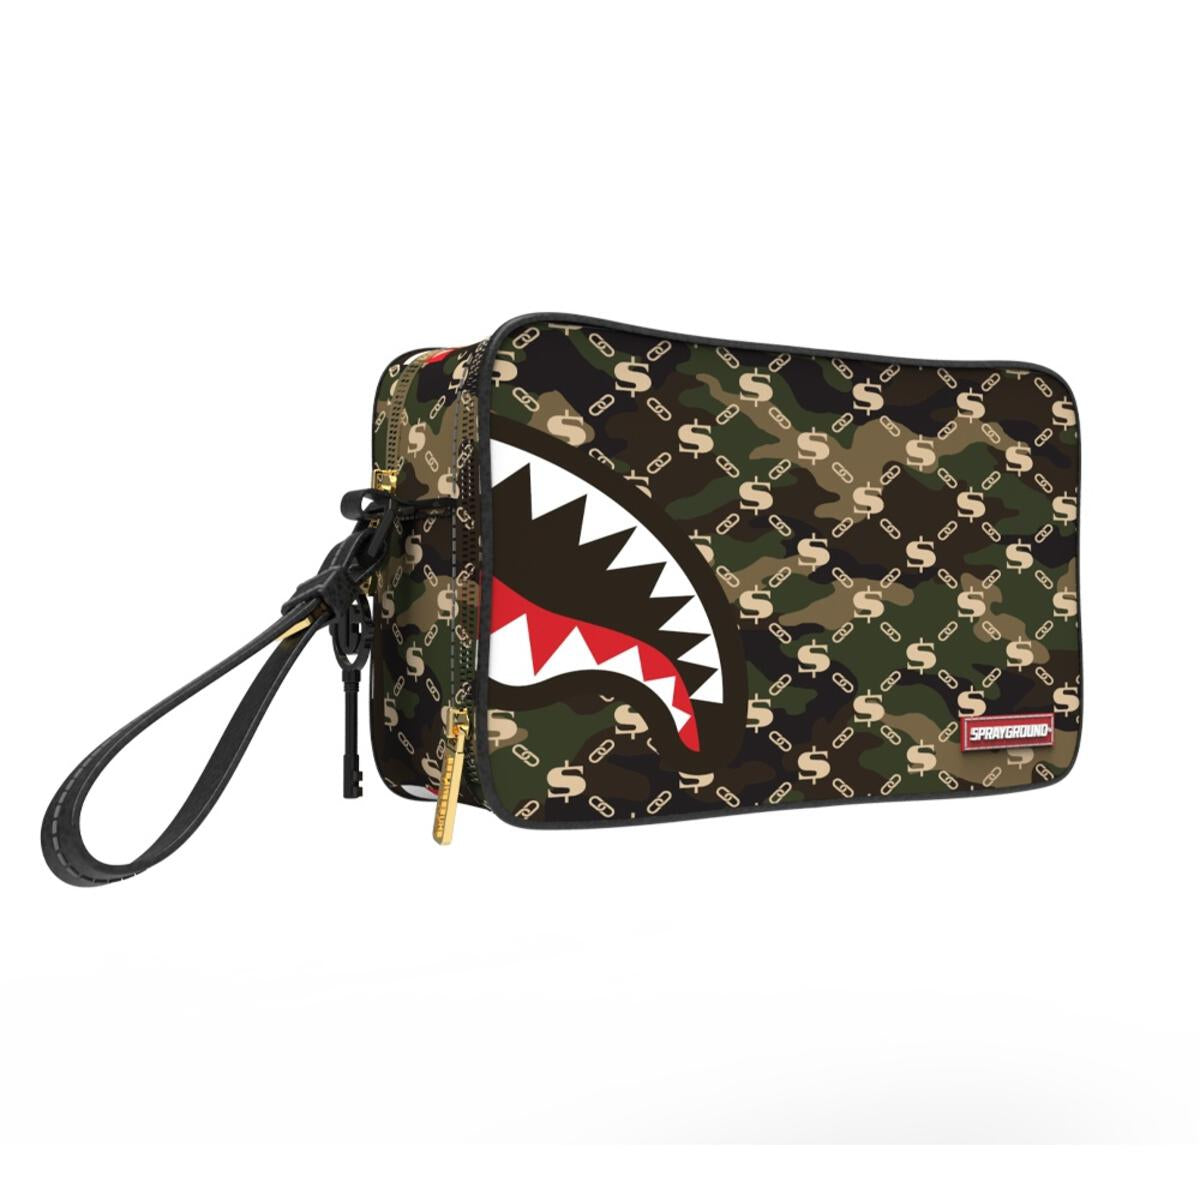 SPRAYGROUND SIP WITH CAMO ACCENT SAVAGE BACKPACK